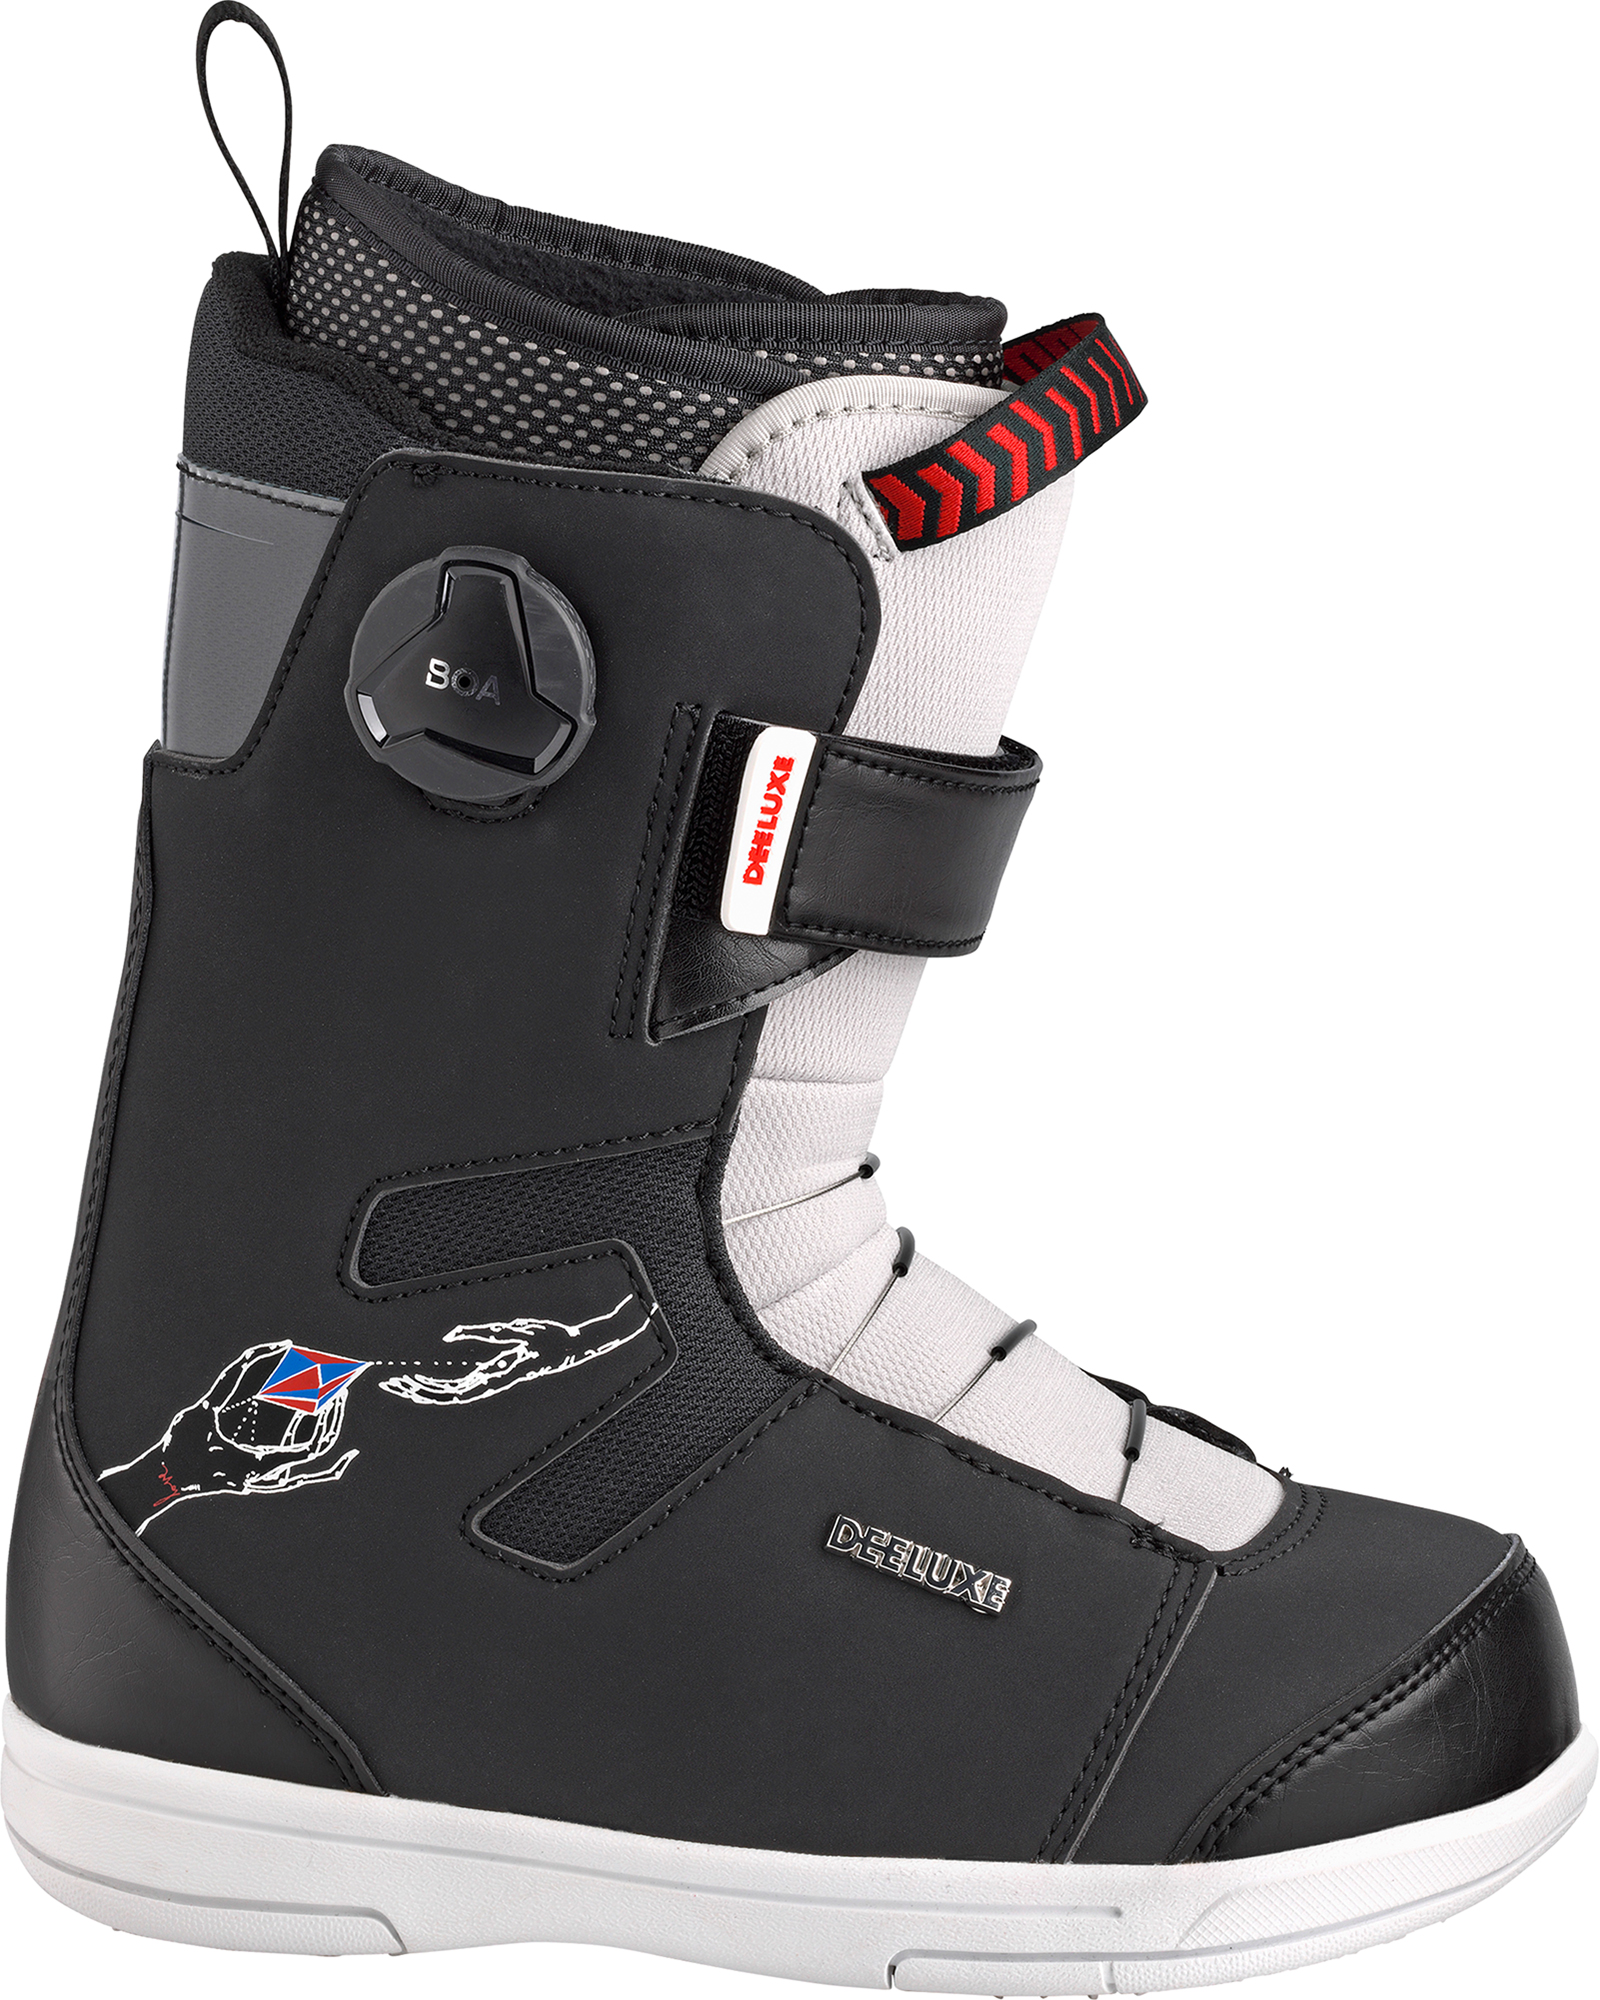 Deeluxe Youth Rough Diamond Snowboard Boots